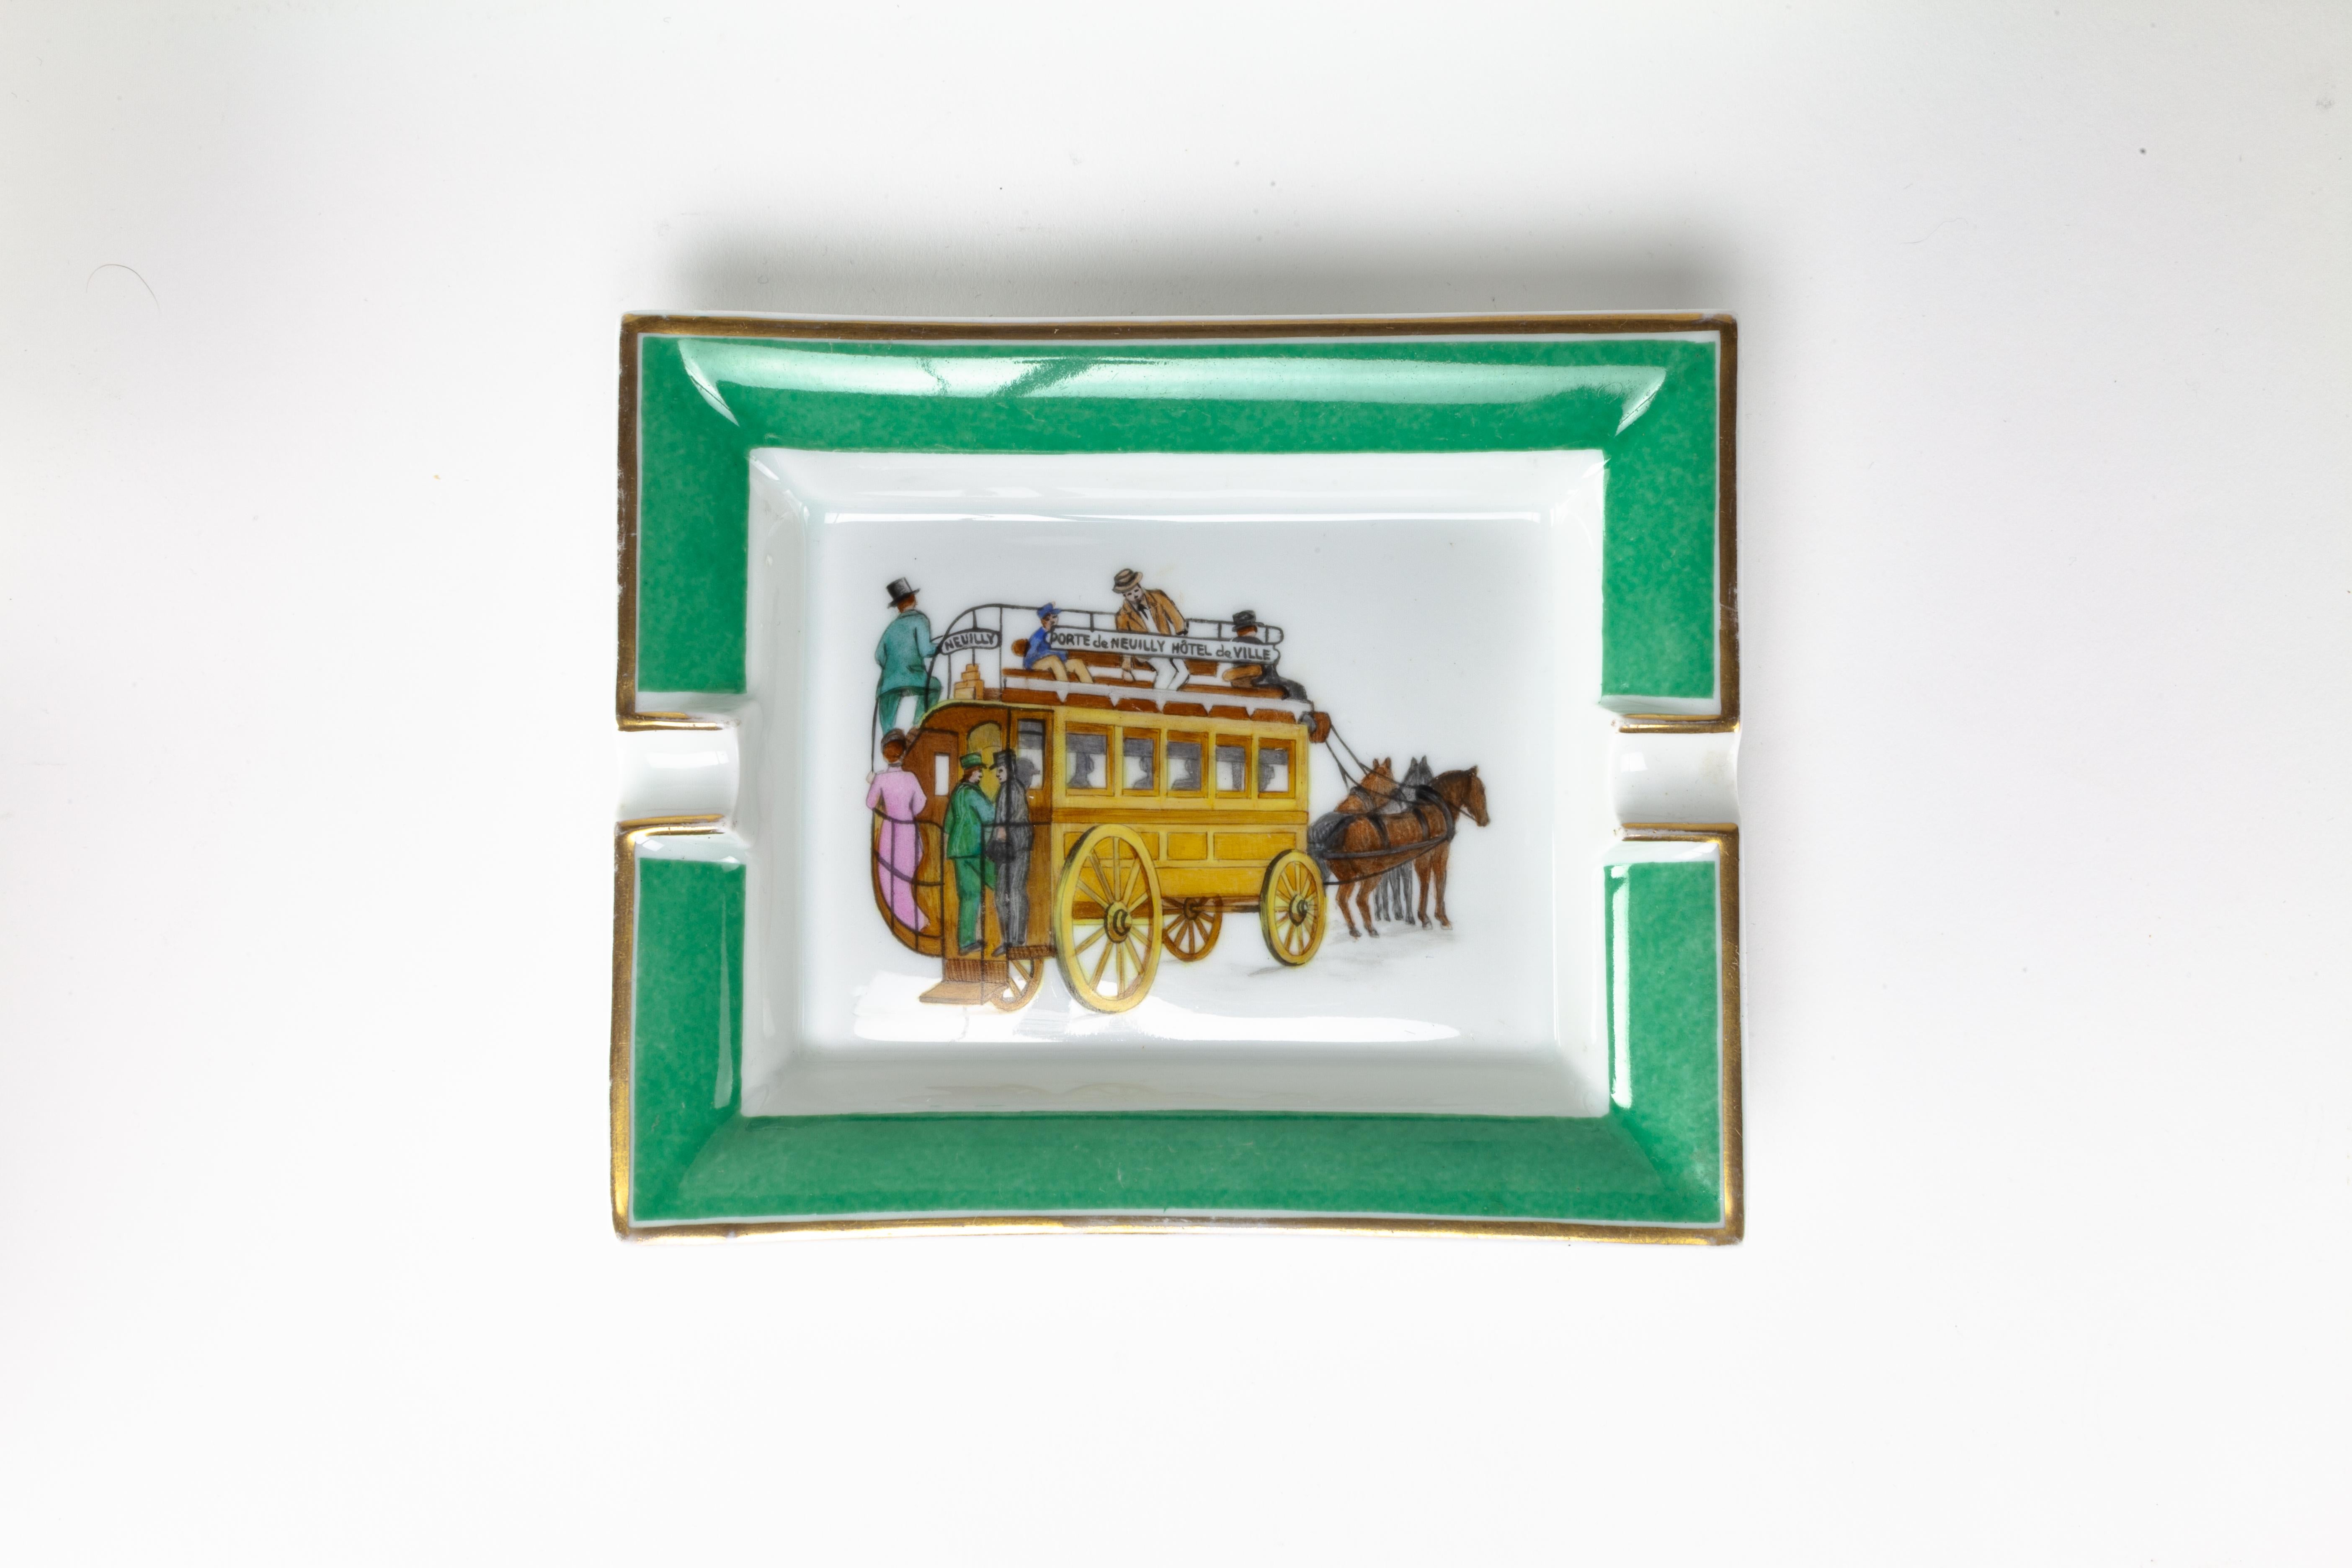 A Classic and elegant porcelain ashtray. Featuring a double-deck carriage and riders.